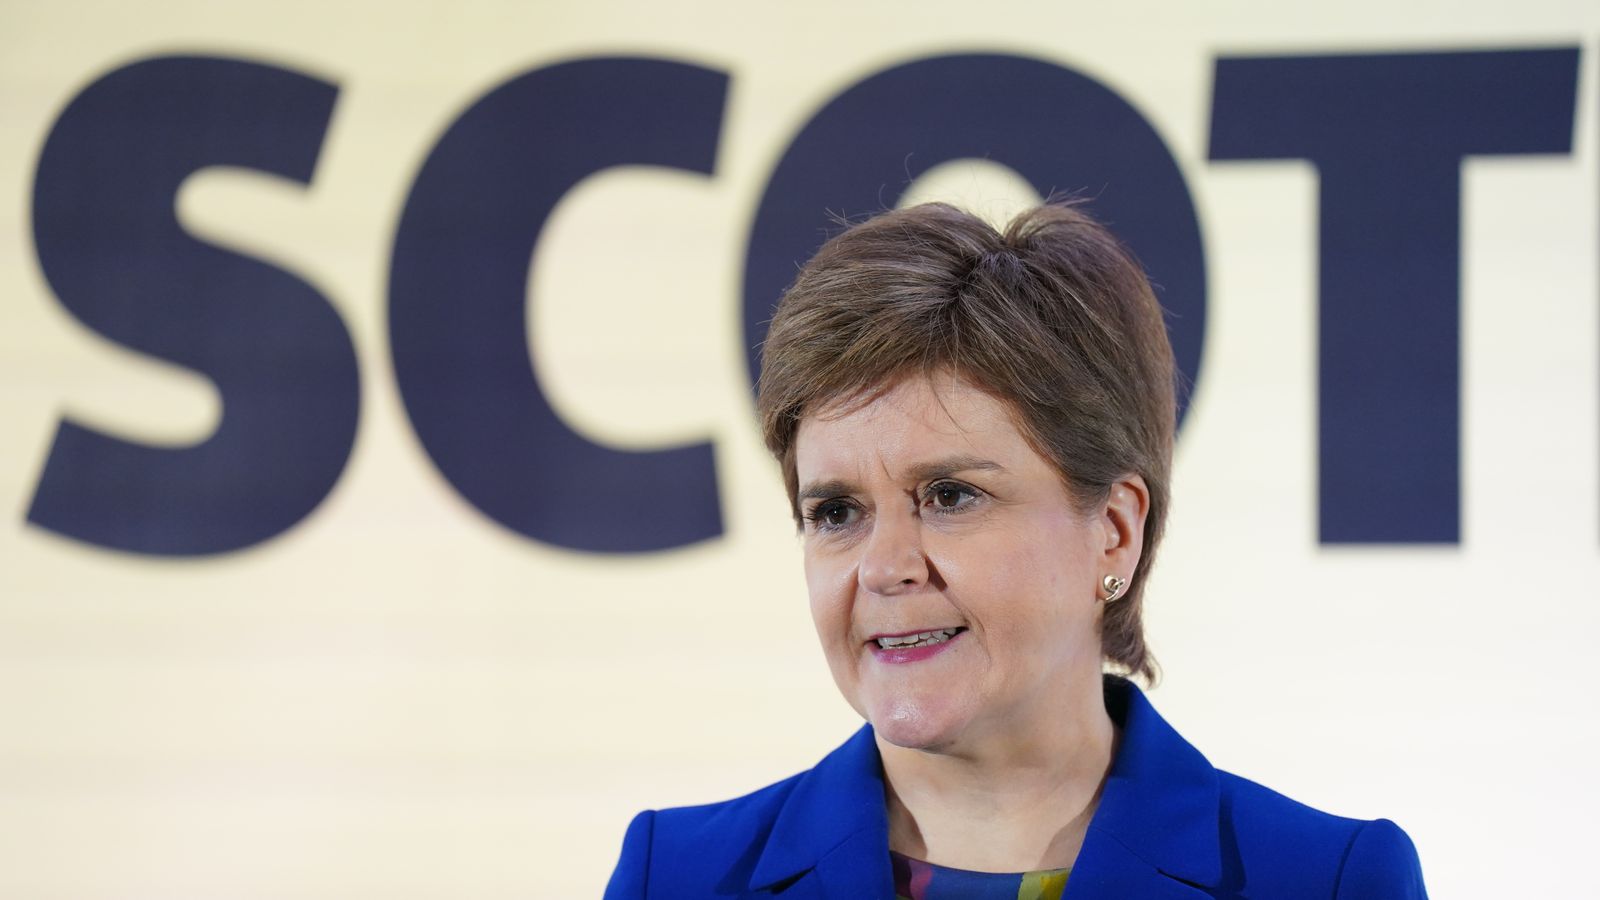 Pensioner who threatened to assassinate Nicola Sturgeon found guilty